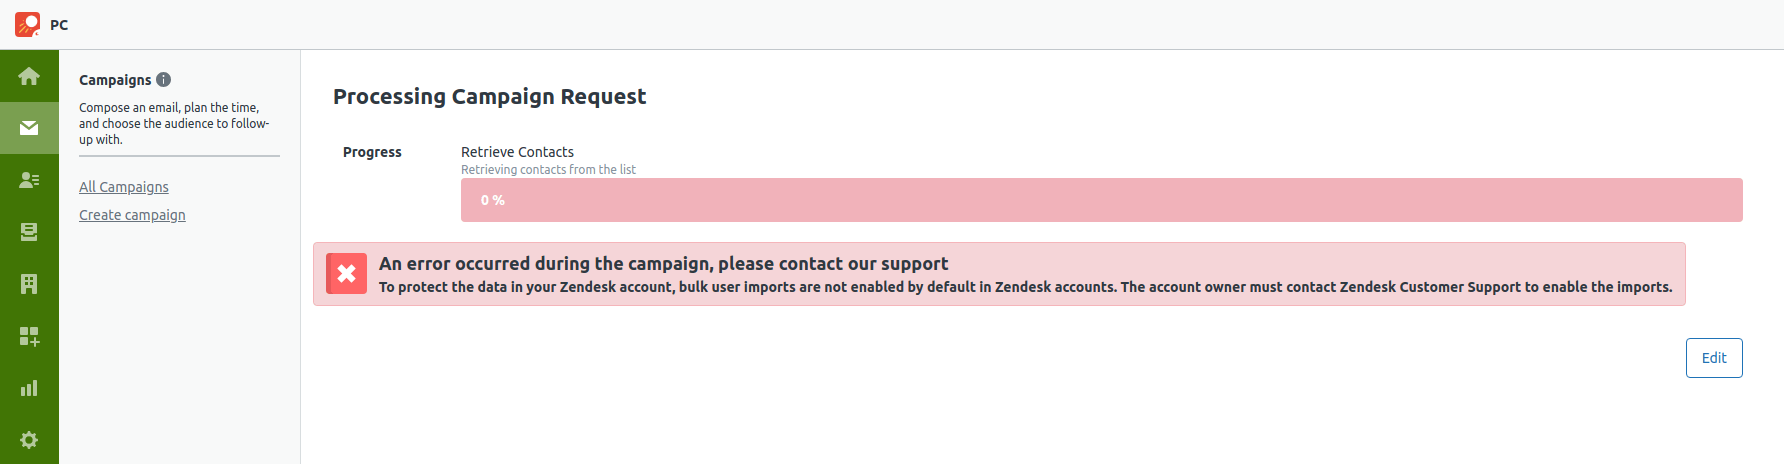 Bulk User Imports Are Not Enabled